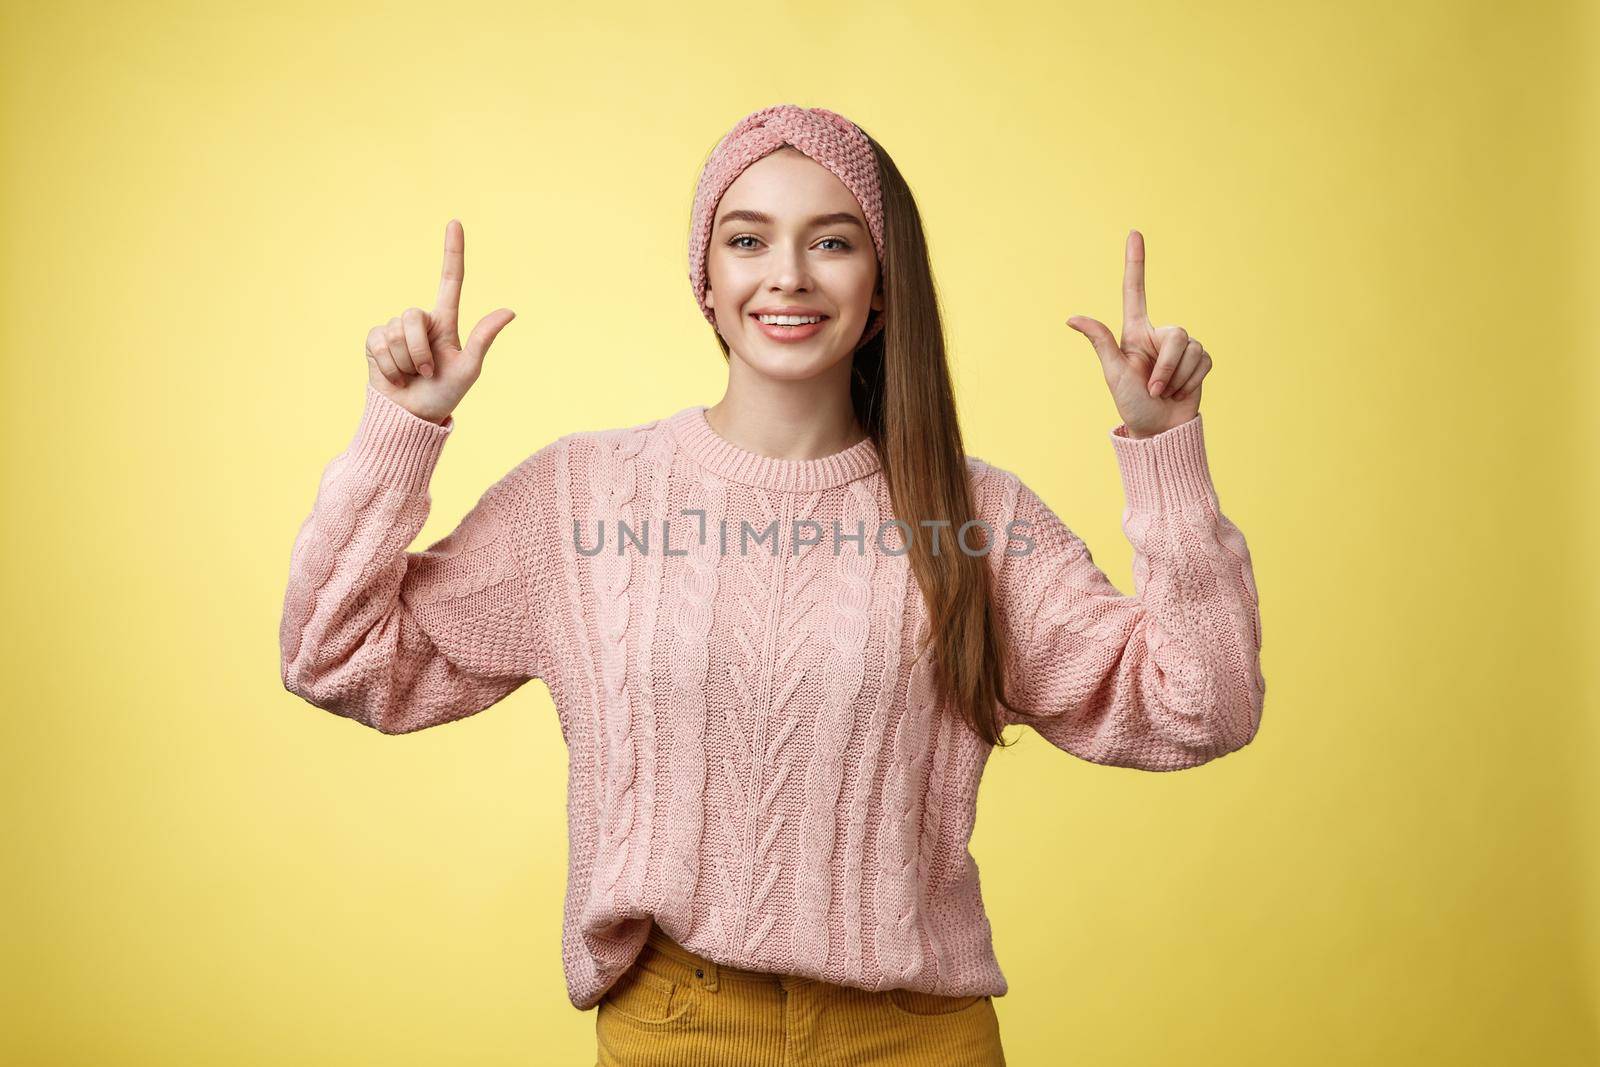 Easygoing beautiful young female student in knitted sweater, headband pointing up, promoting advertisement, smiling happily, feeling positive posing in good mood, grinning at camera over yellow wall.